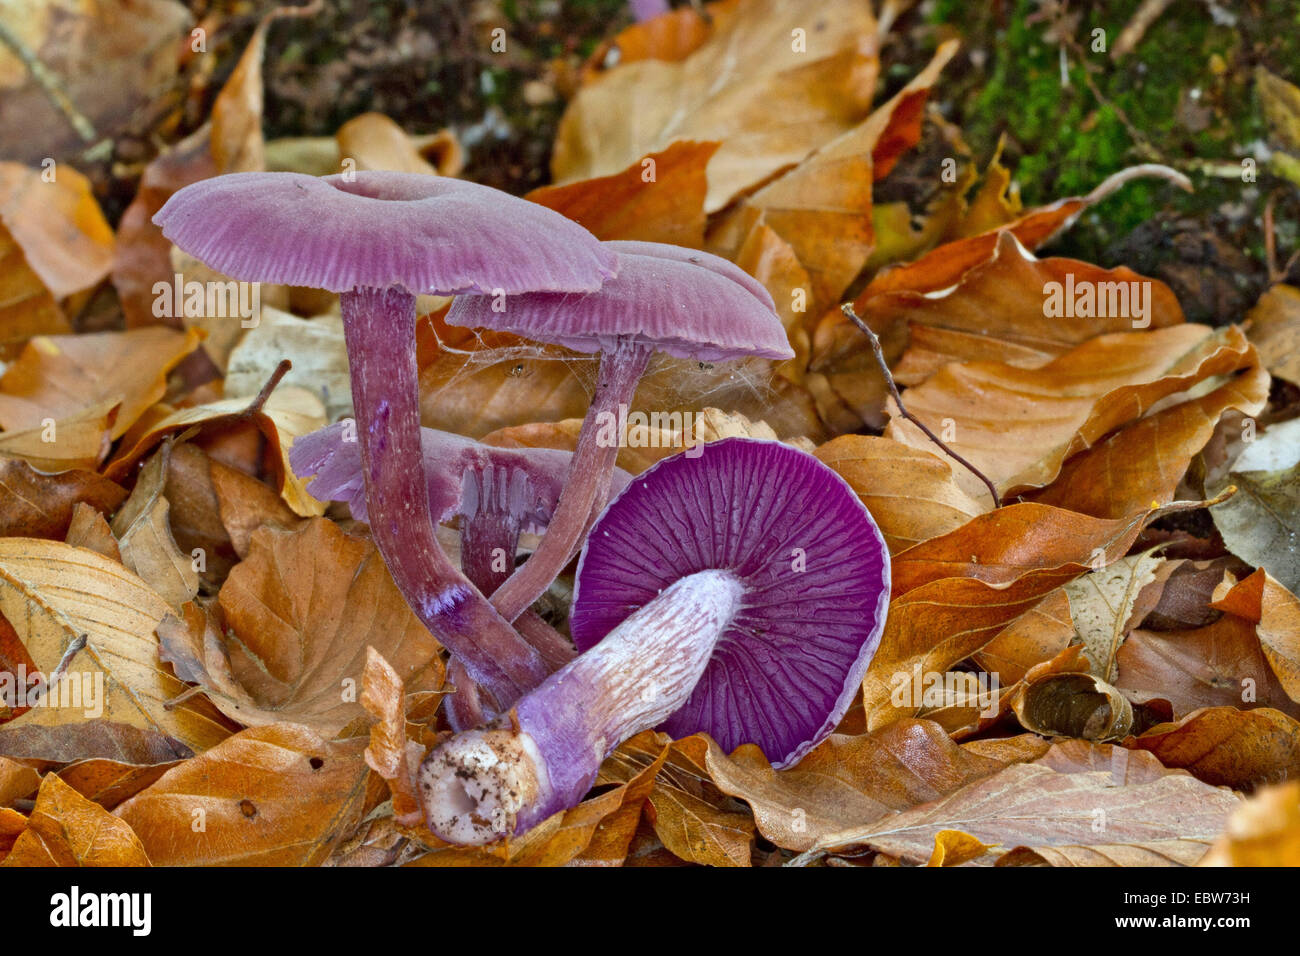 amethyst deceiver (Laccaria amethystea, Laccaria amethystina), four fruiting bodies on forest floor, one of them overturned, Germany, Mecklenburg-Western Pomerania Stock Photo